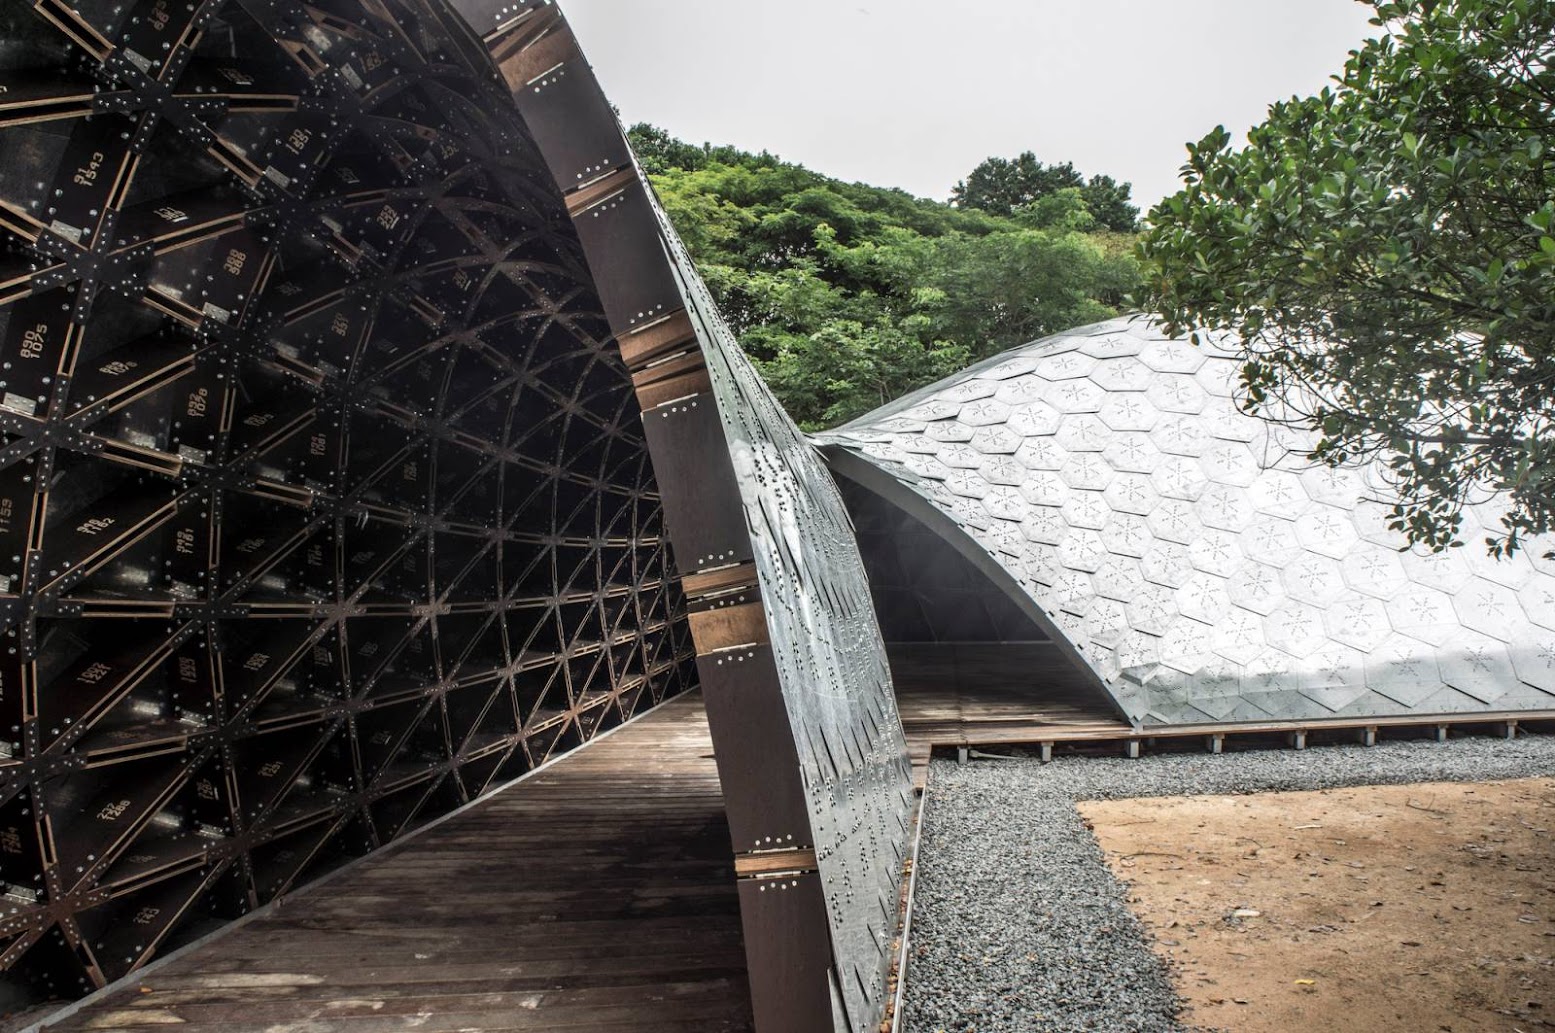 Dover Road, Singapore: [SUTD LIBRARY GRIDSHELL PAVILION BY CITY FORM LAB]